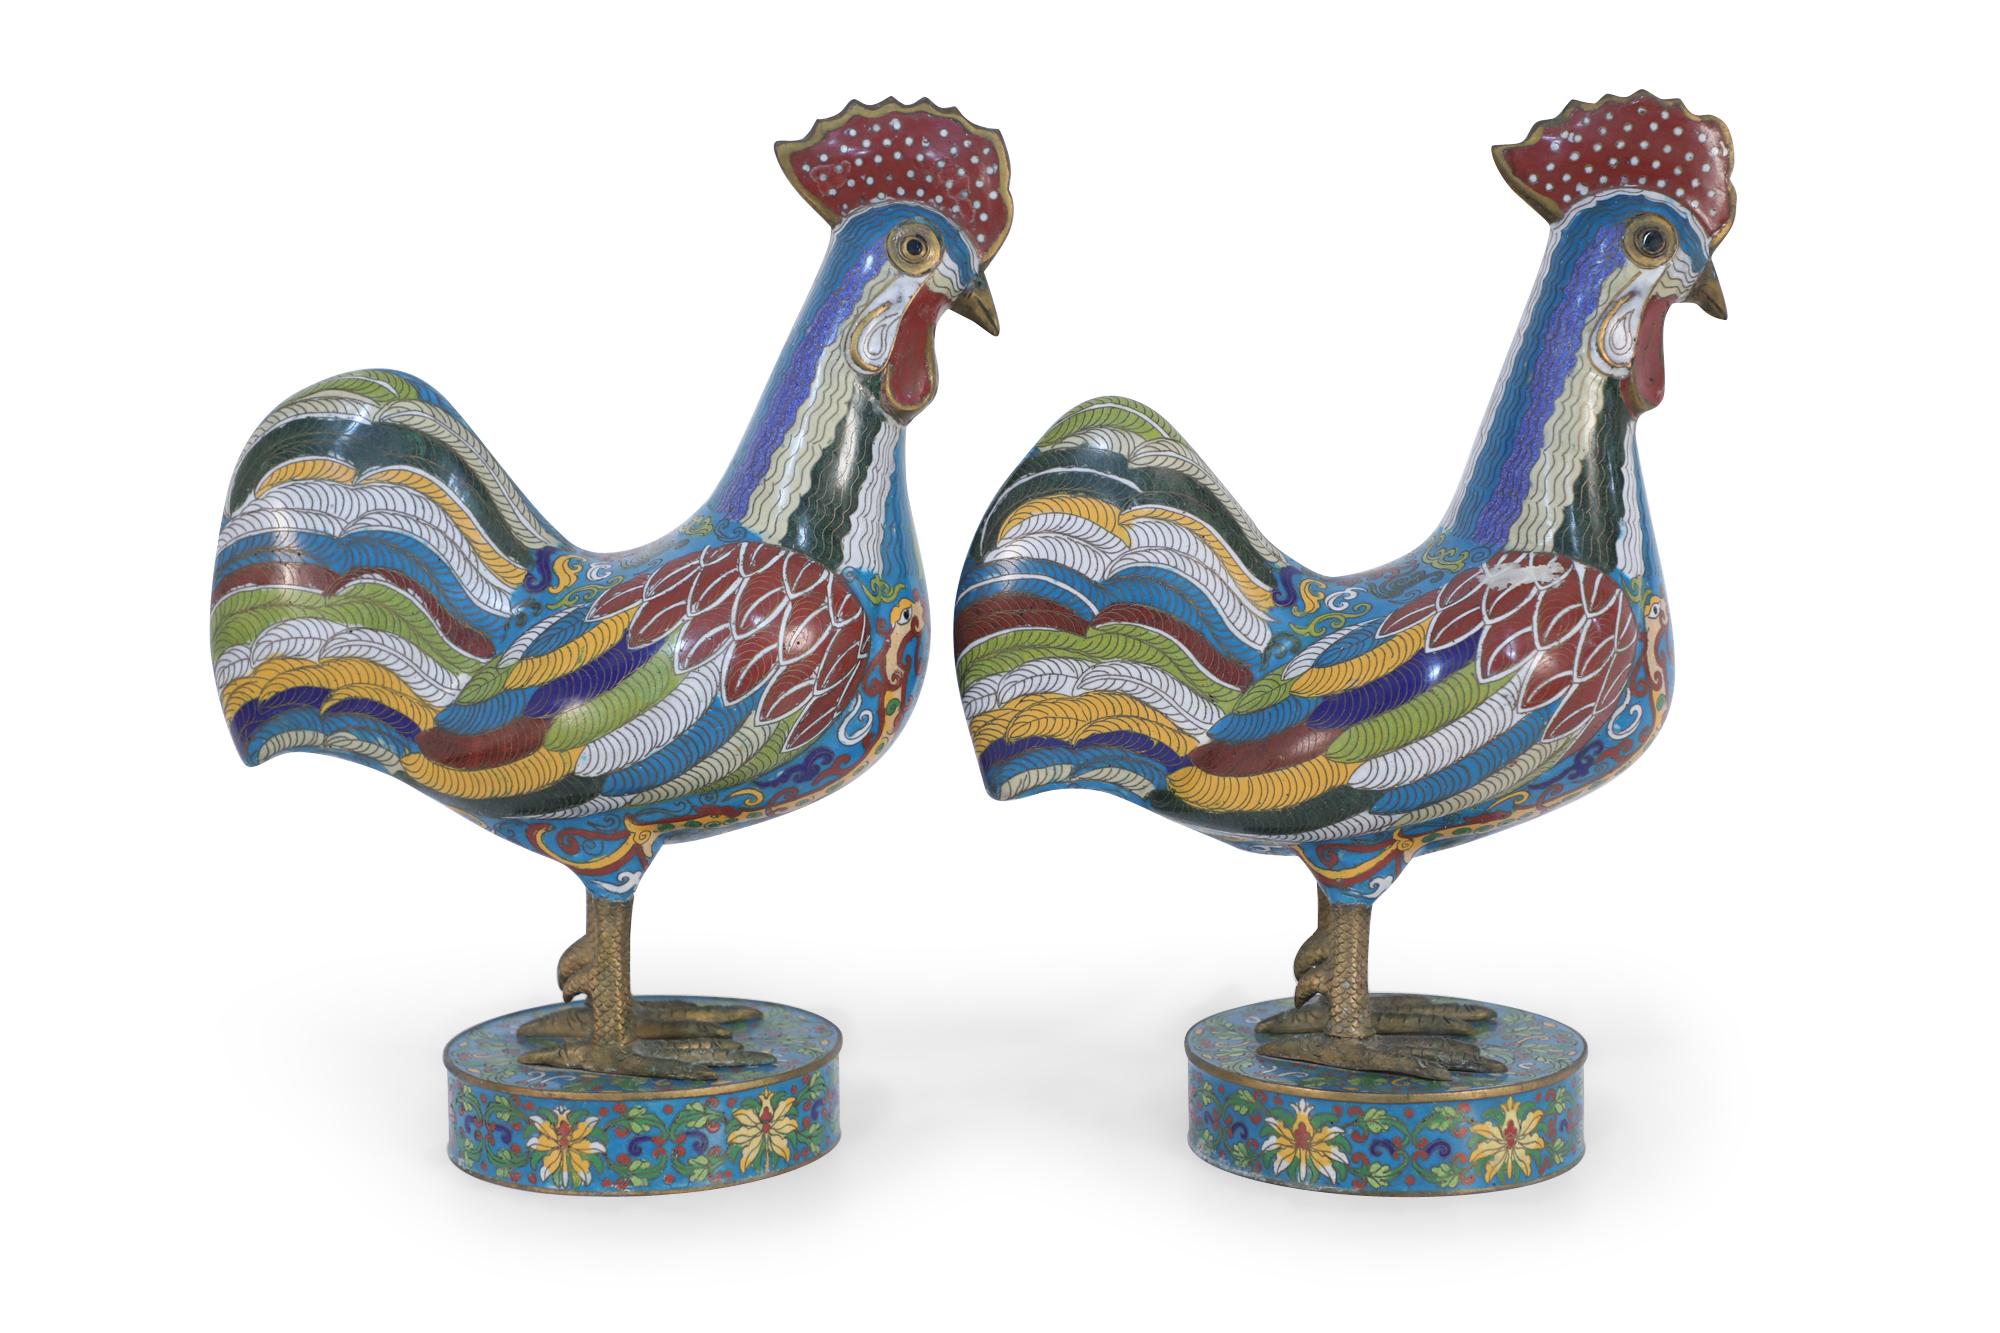 Pair of Early 20th Century Chinese Multi-Colored Cloisonne Rooster Sculptures For Sale 3